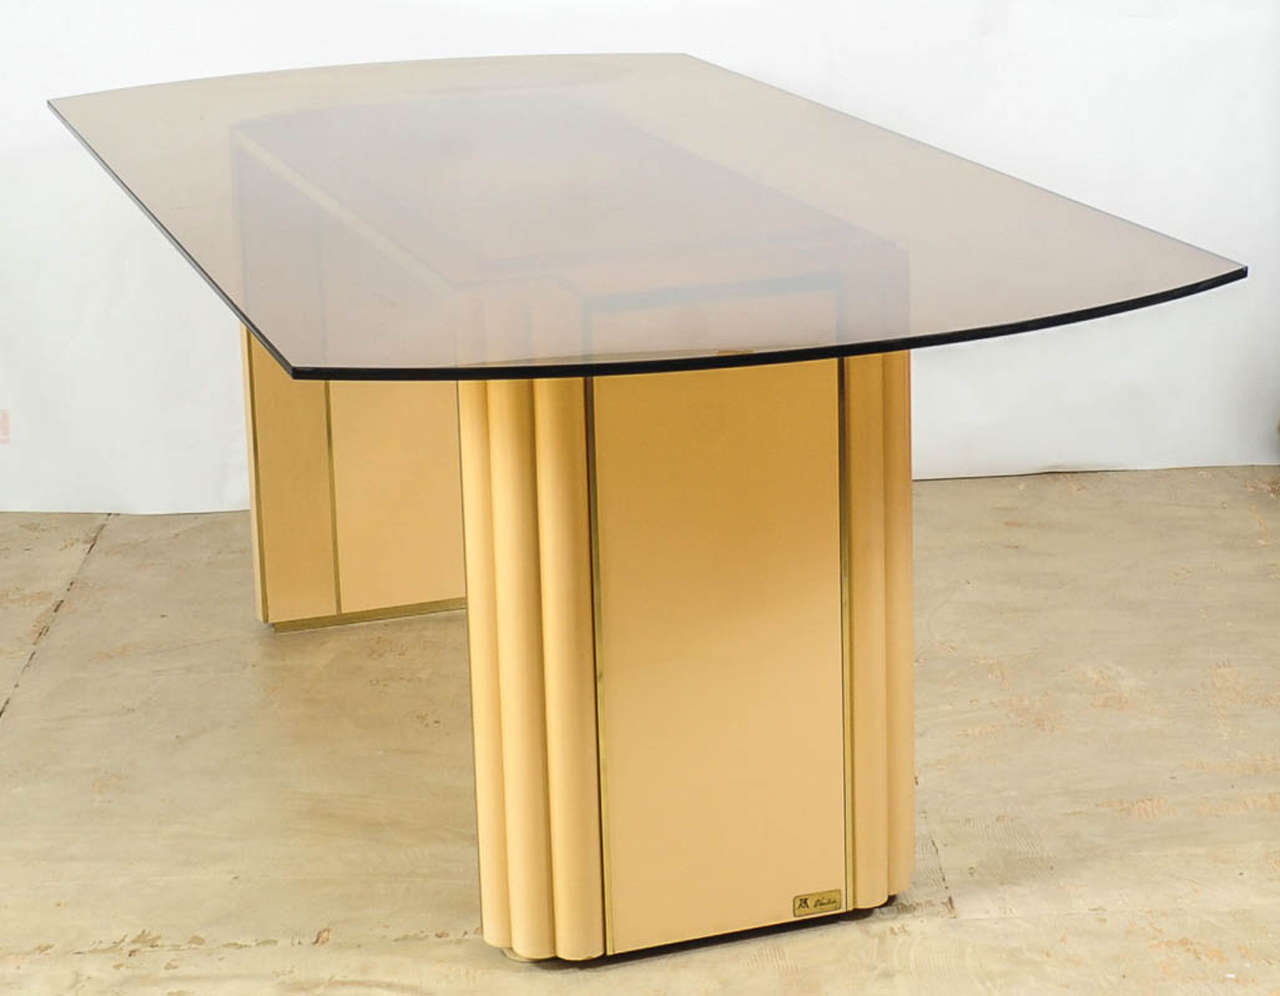 Very elegant dining table in ivory lacquered wood and polished brass designed by Alain Delon for Maison Jansen. The table top is made of smoked glass in a semi oval shape.
French super star actor Alain Delon (born 1935) turned his talents to design